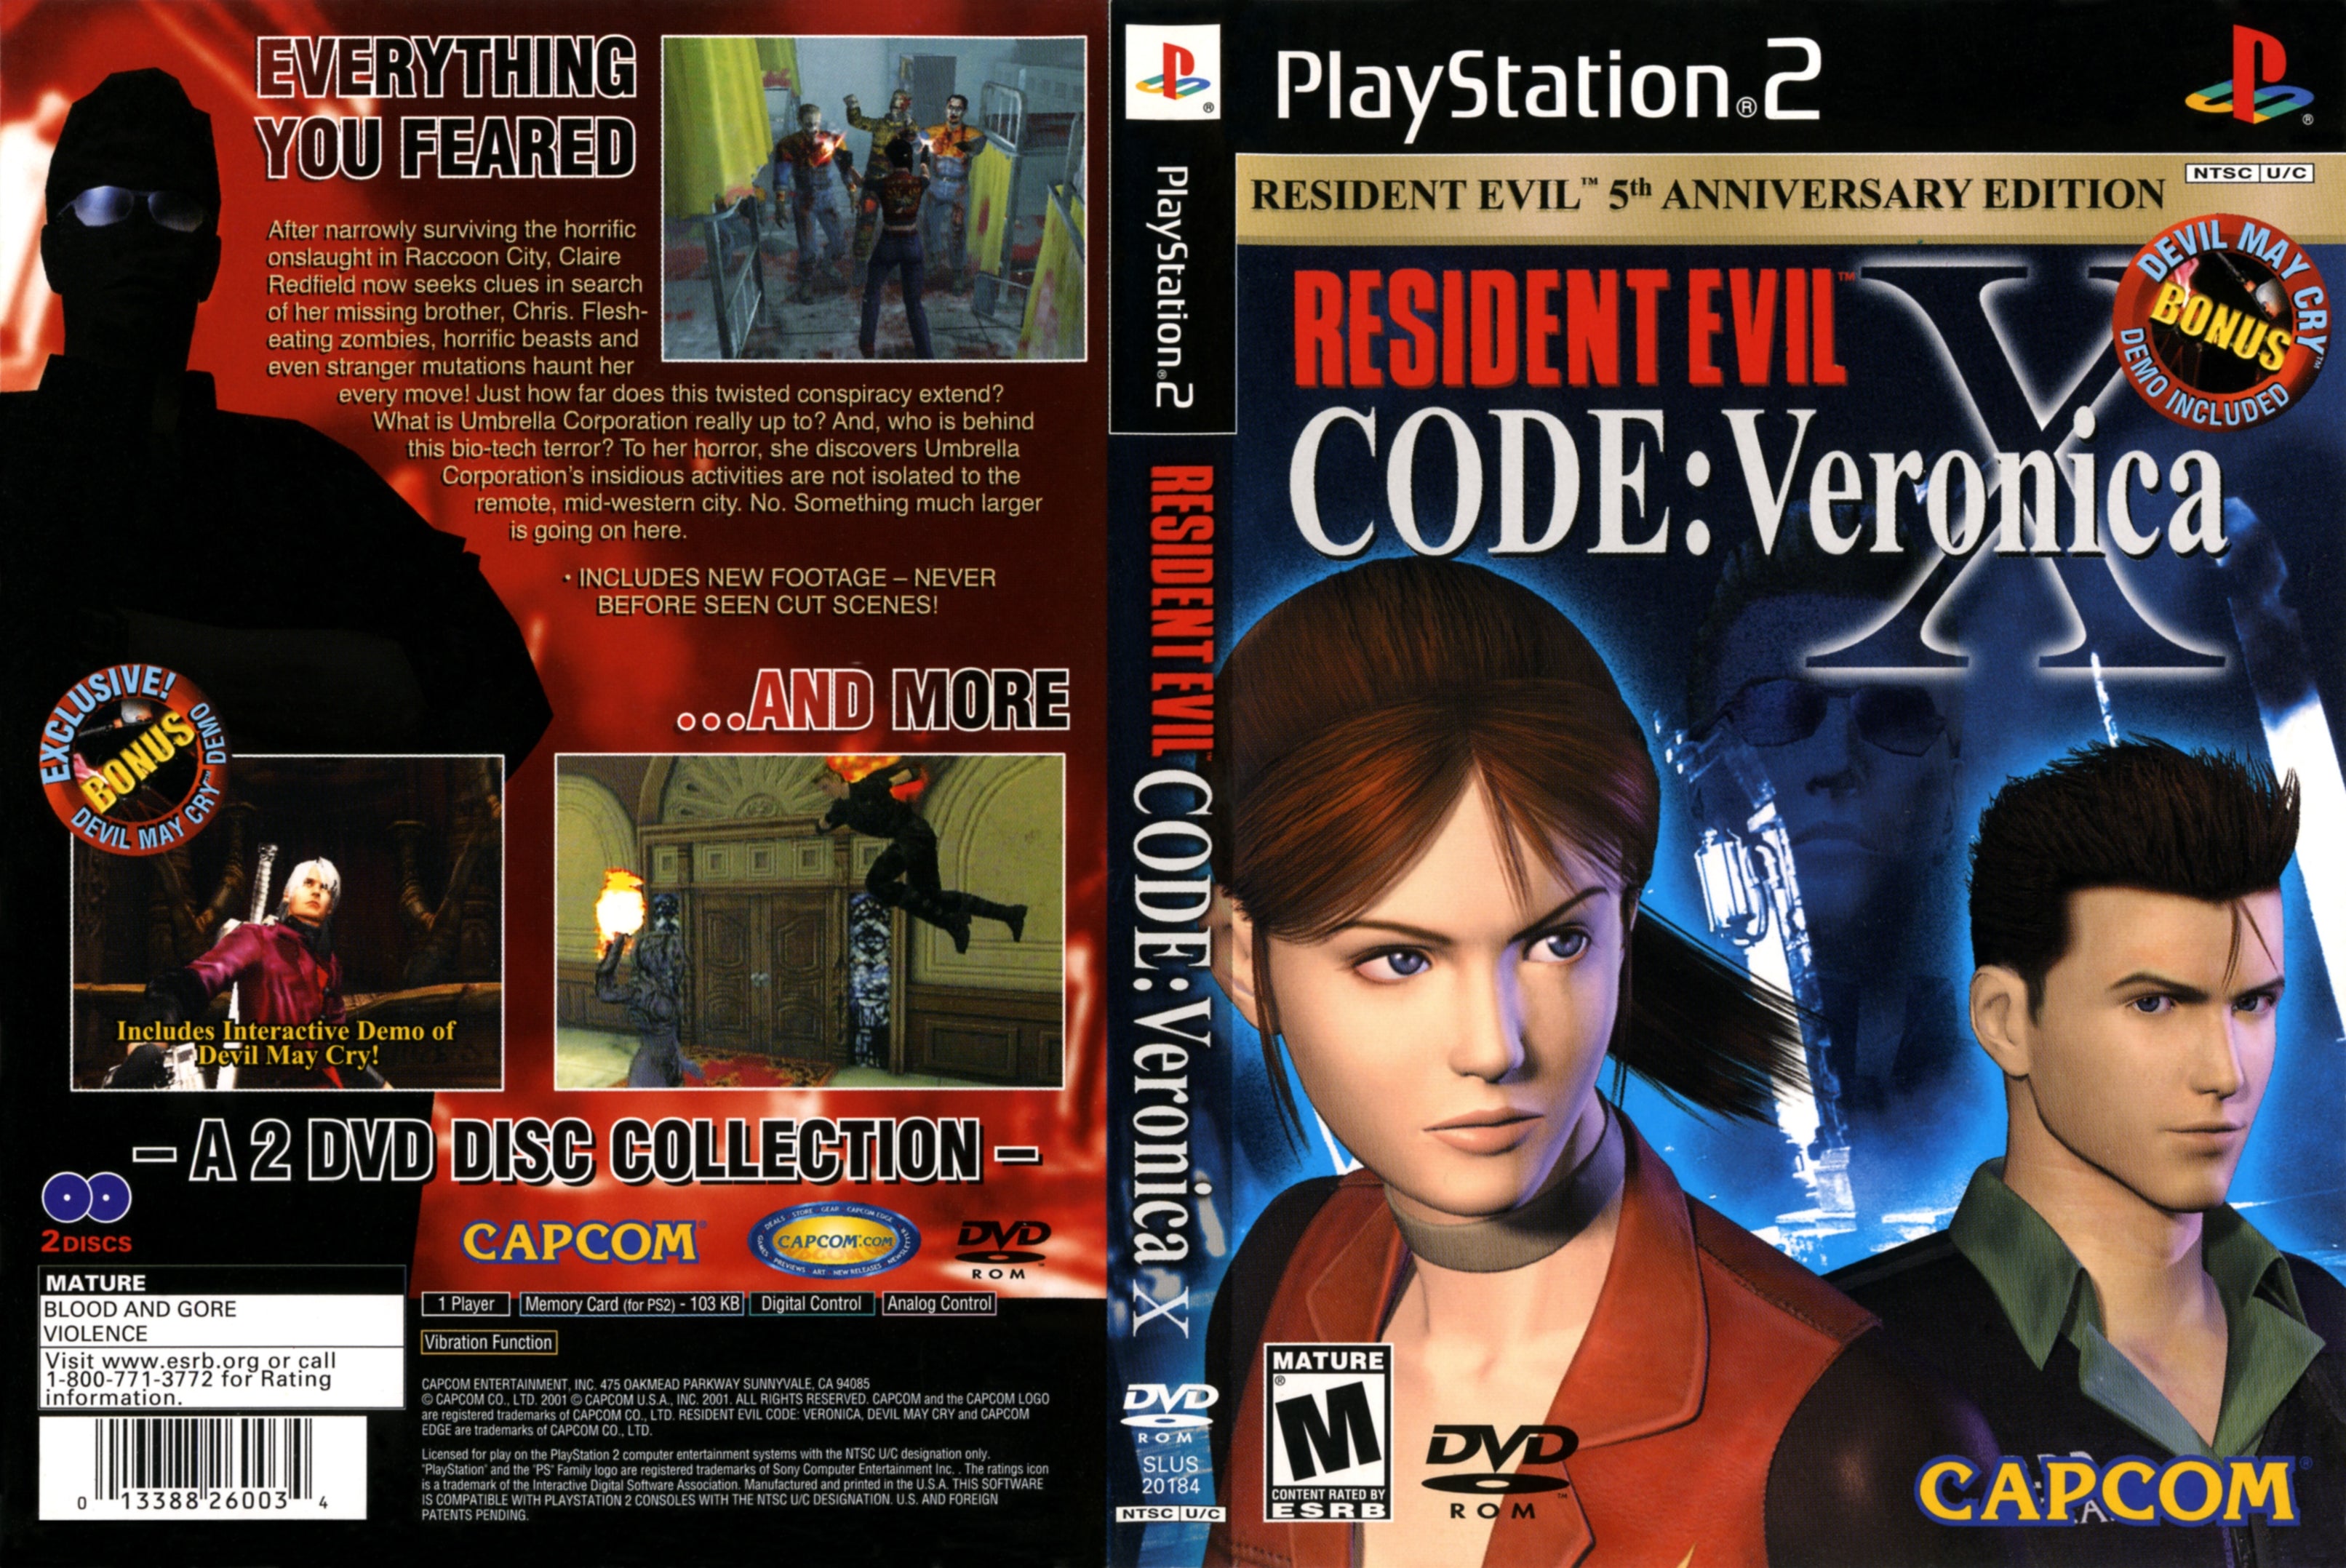 Replaying my personal number one favorite Resident Evil game 'Code Veronica  X' on my PS2 right now. Got my fingers crossed they give the remake  treatment like RE 2 and 3! Any